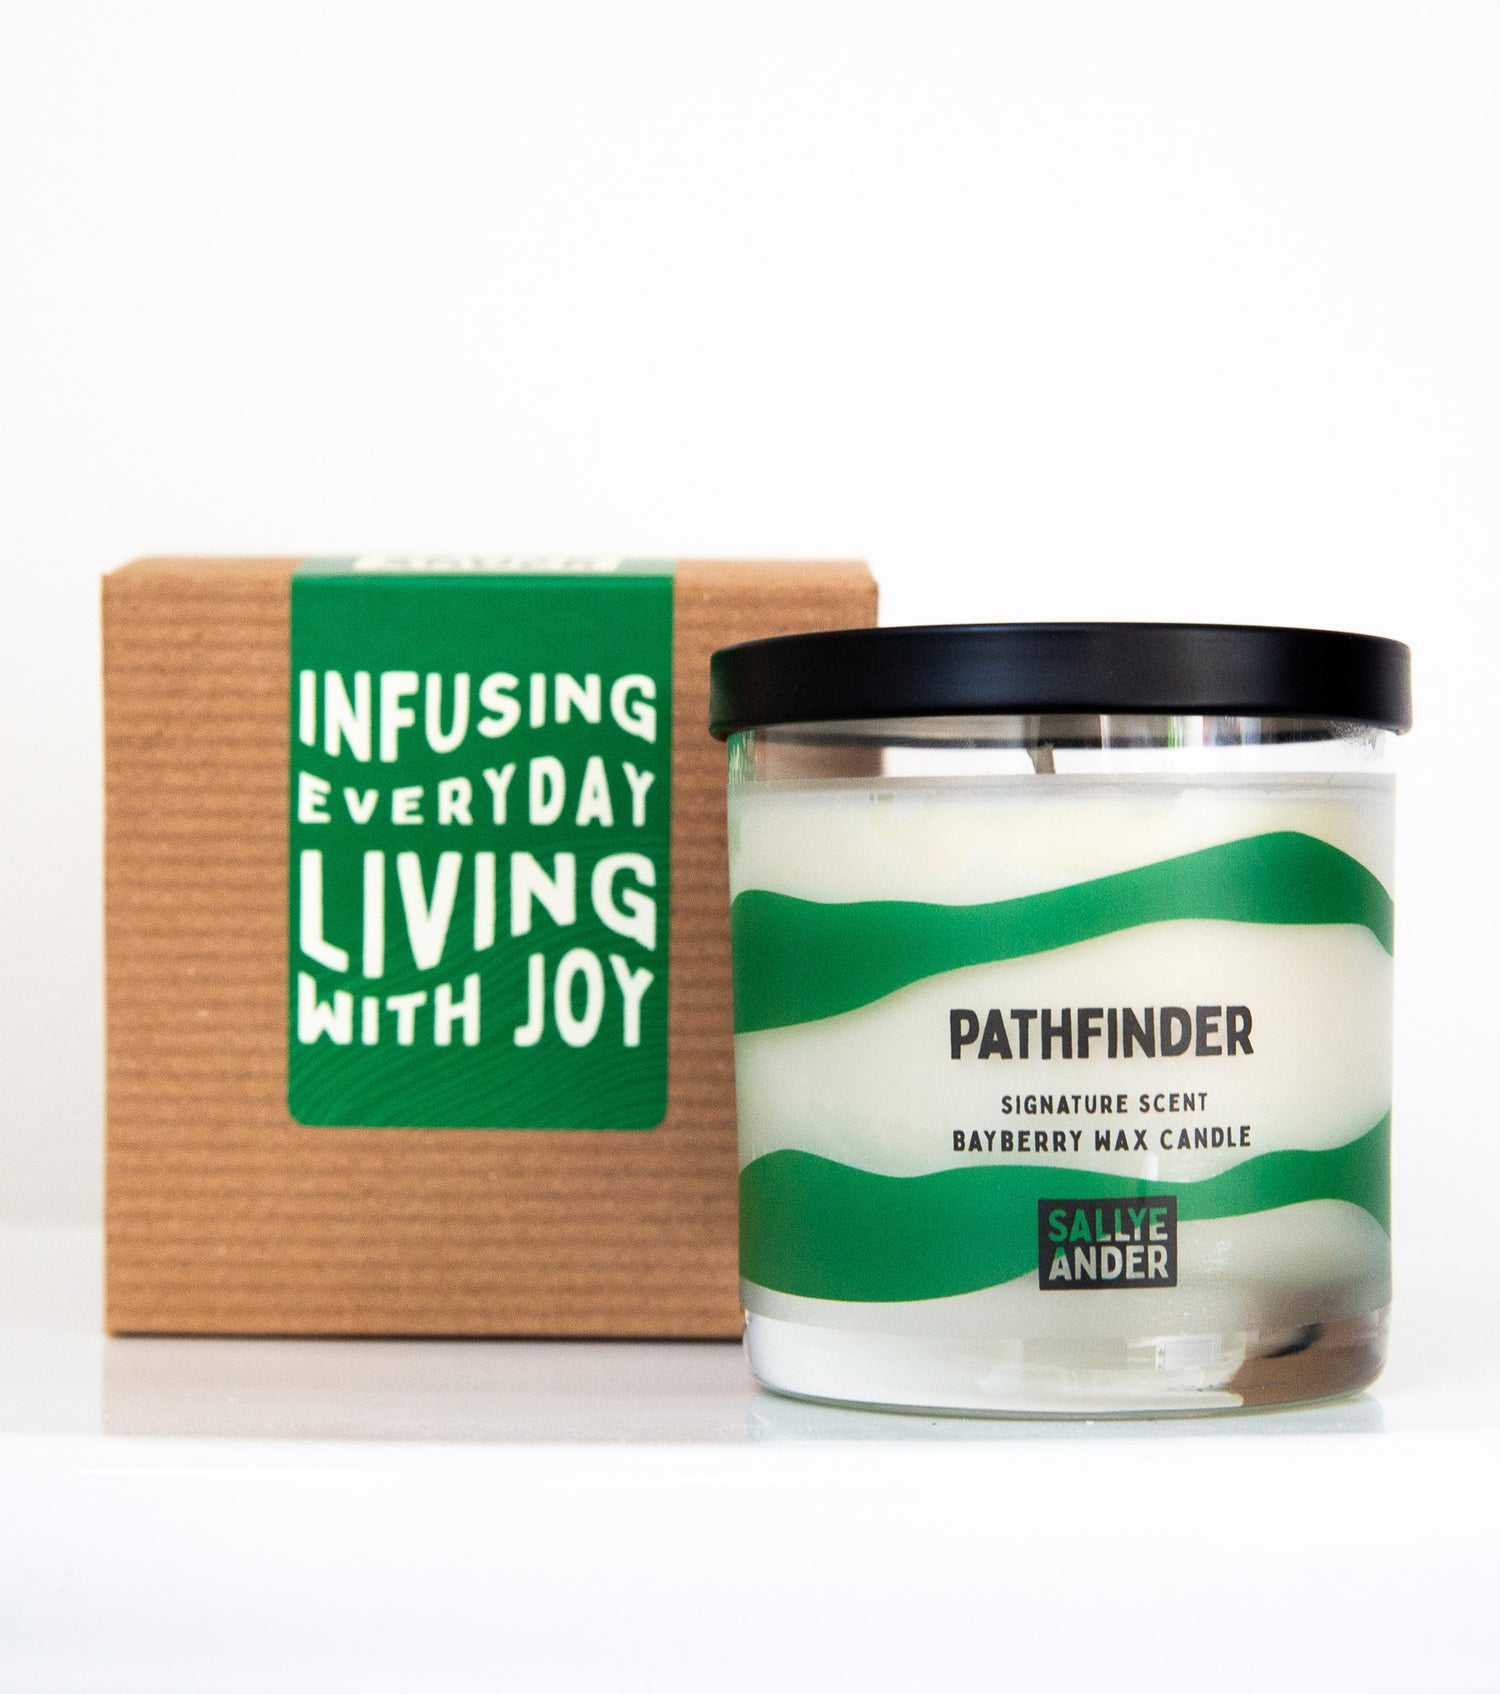 Pathfinder Bayberry Wax Blend Candle